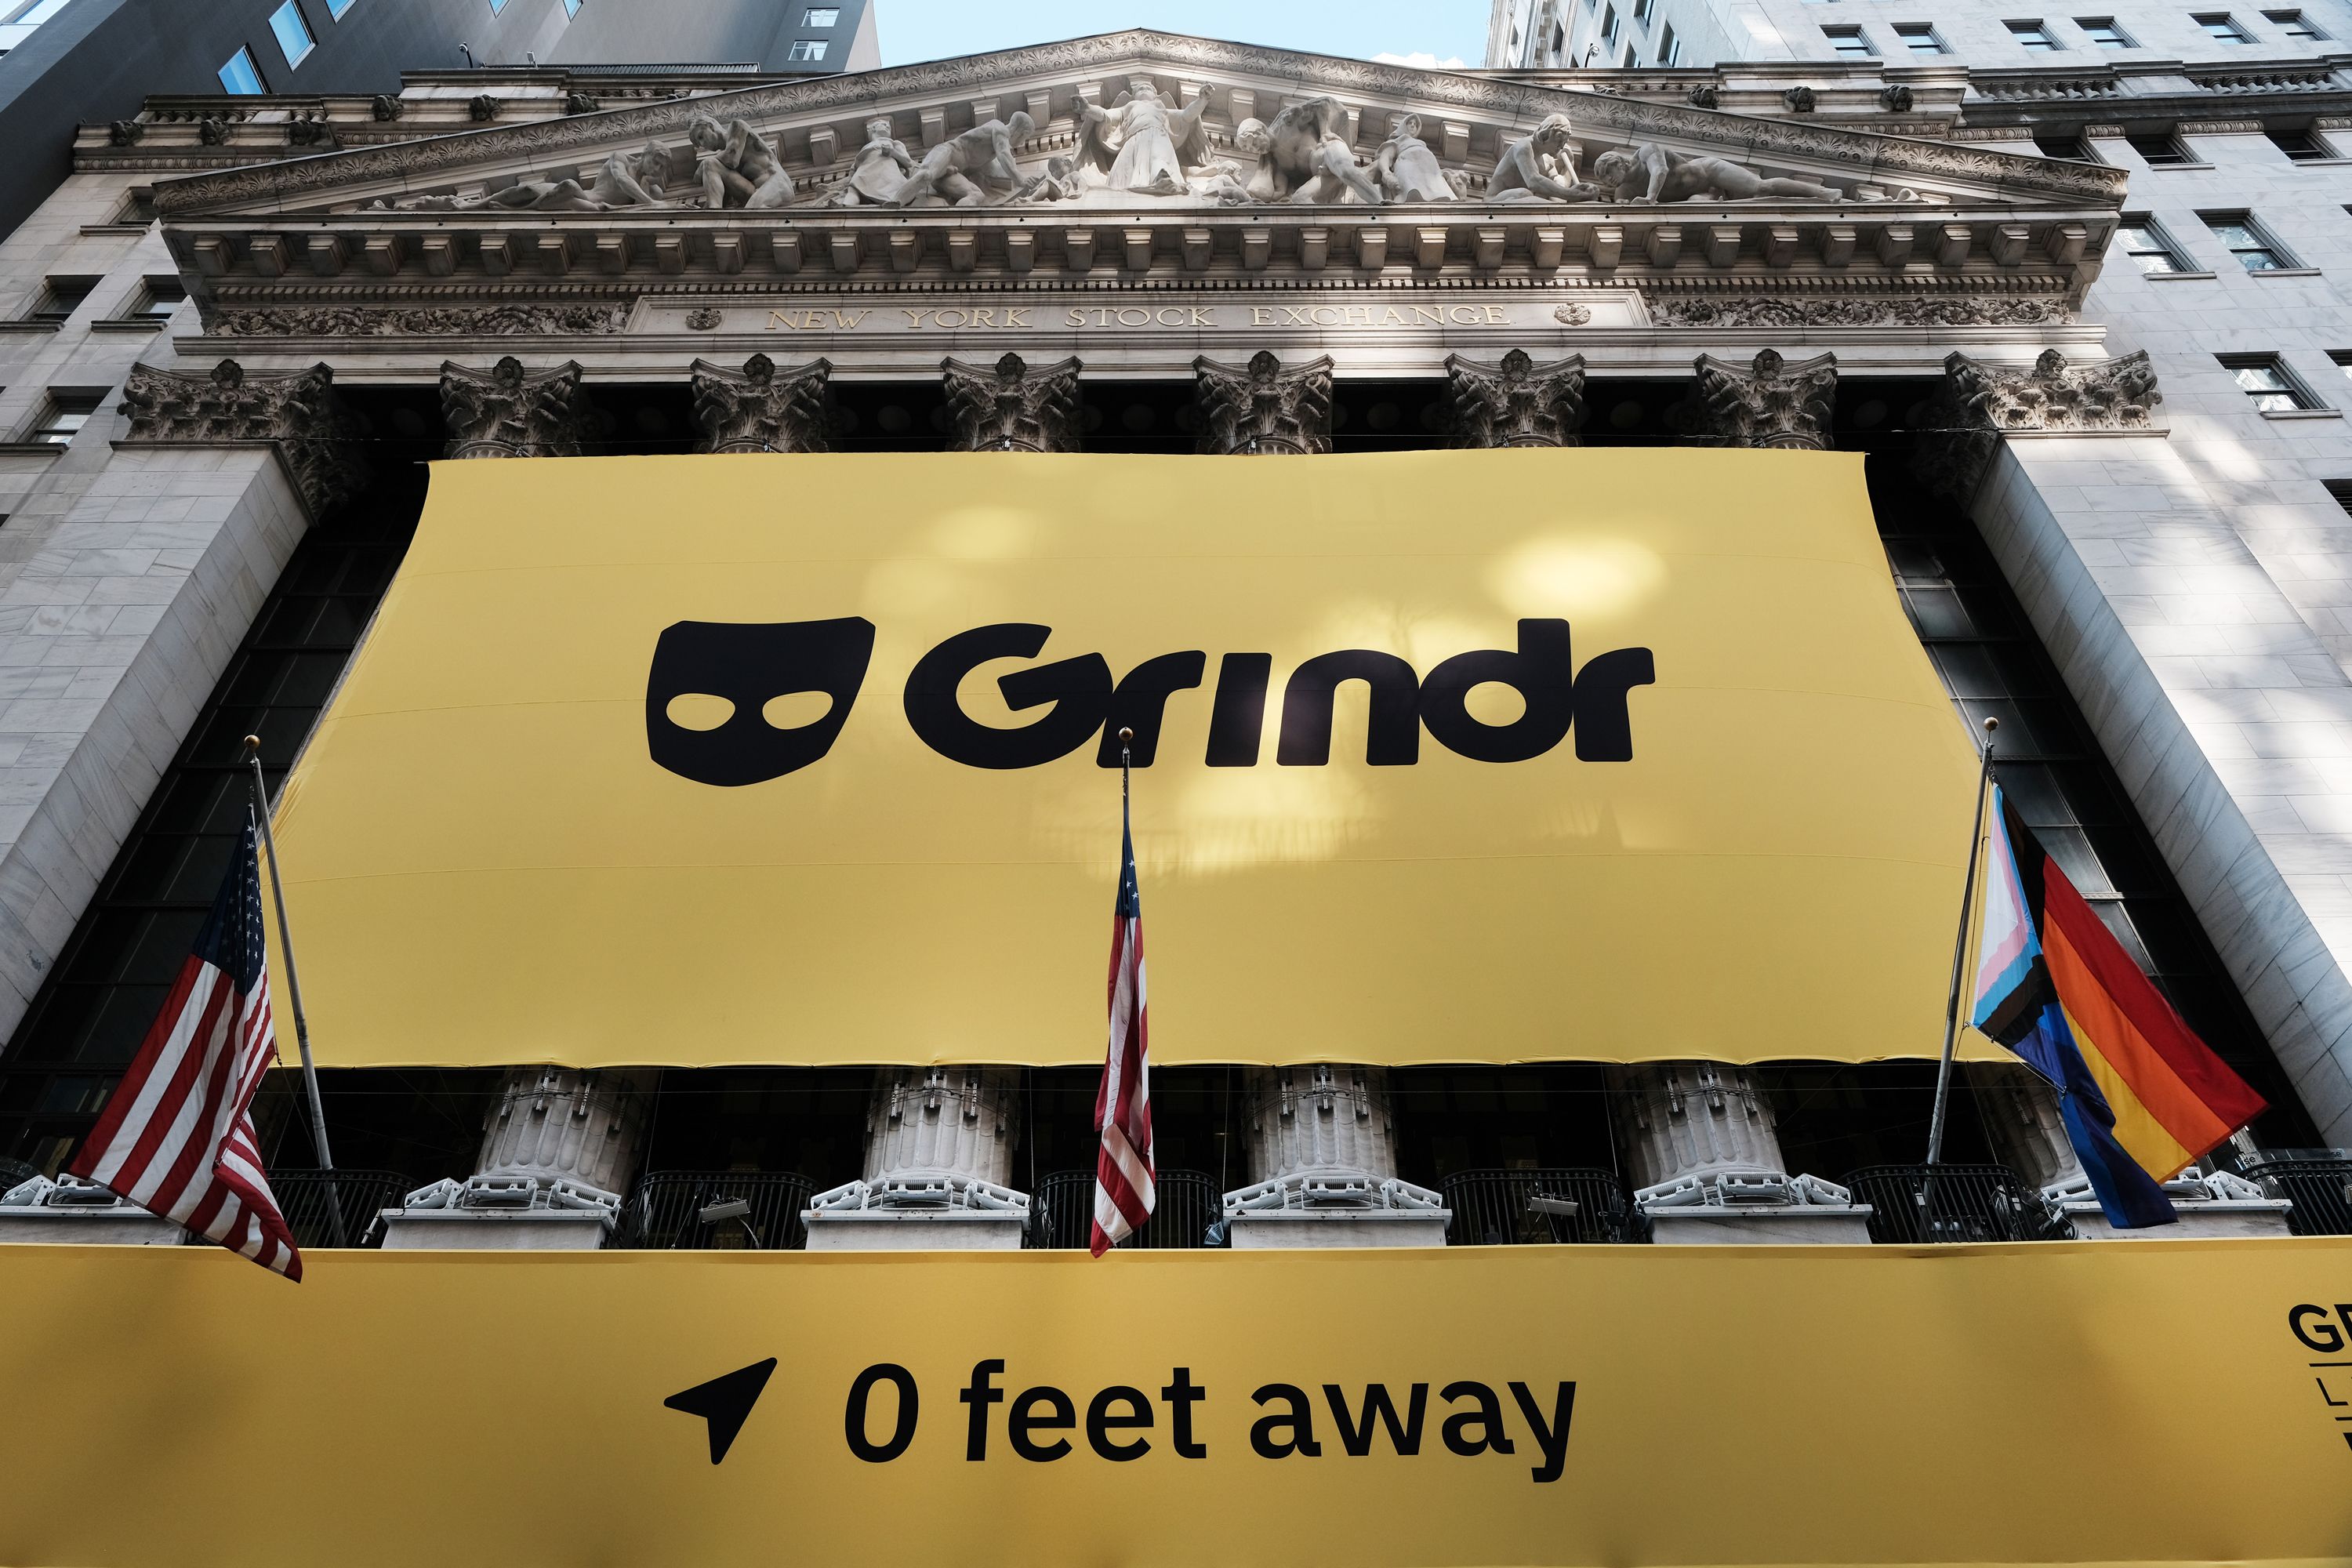 Dating app Grindr loses nearly half its staff after trying to force a return to office | CNN Business